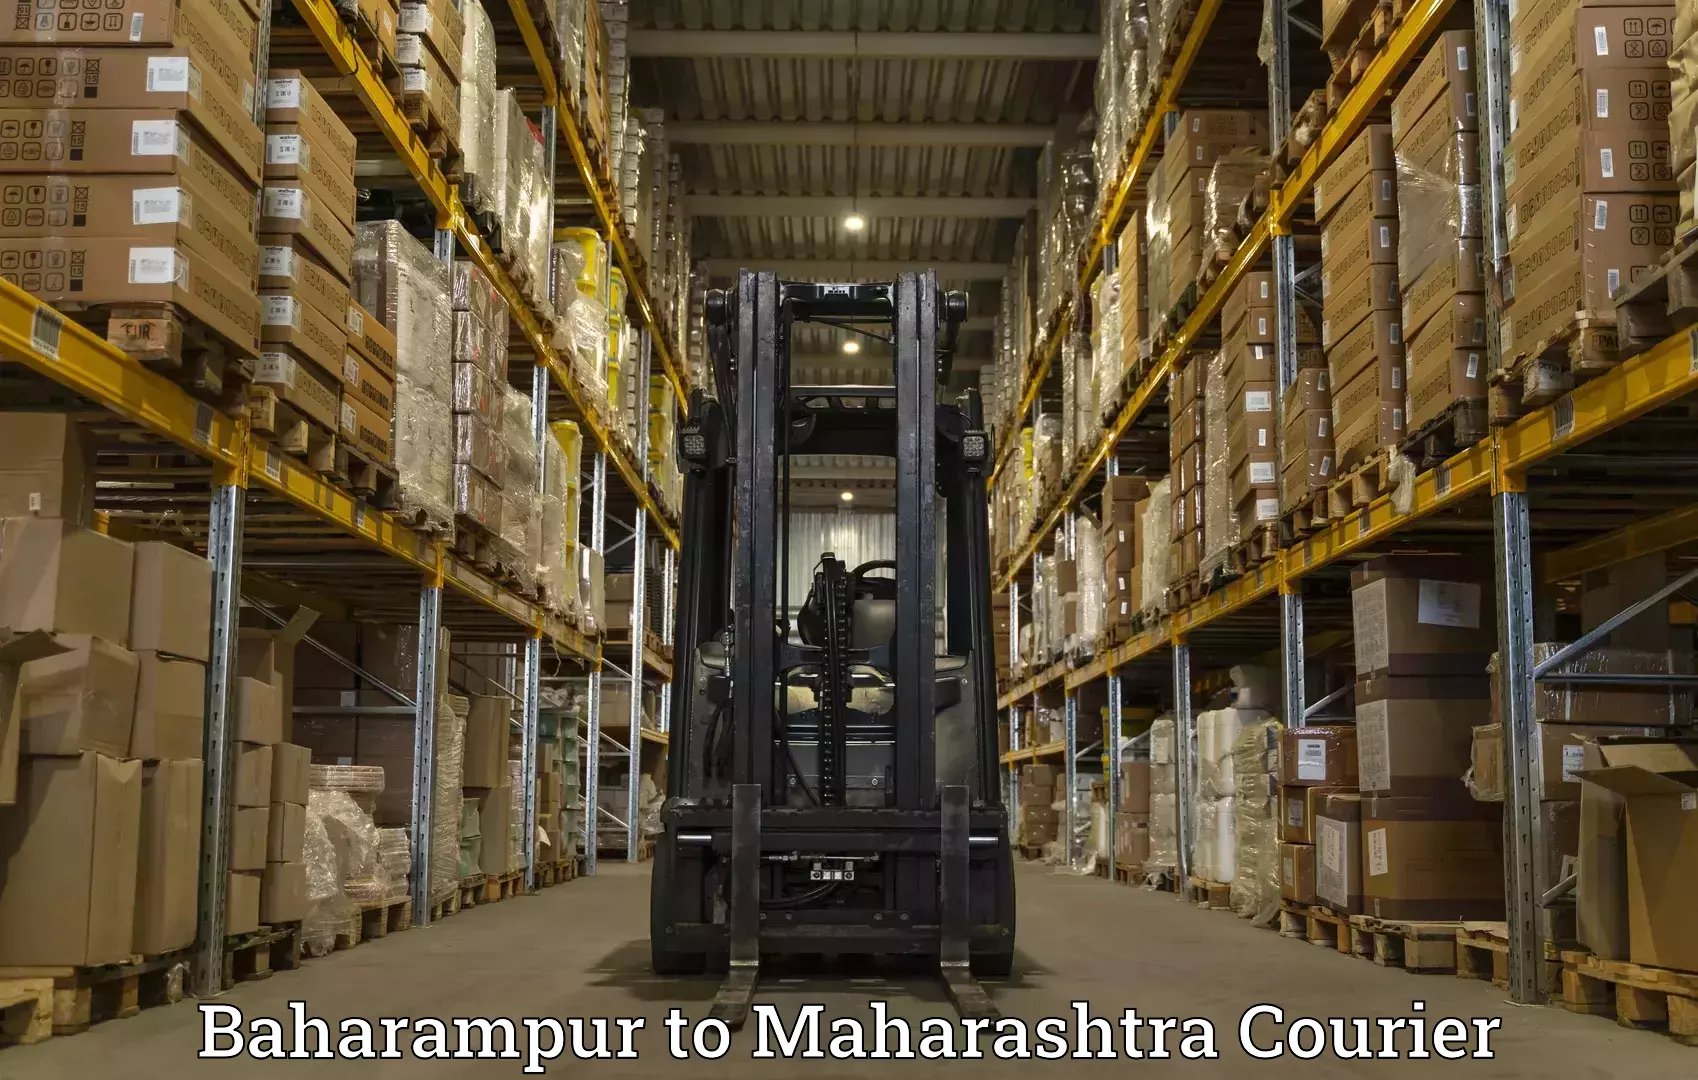 Courier service efficiency Baharampur to Mumbai Port